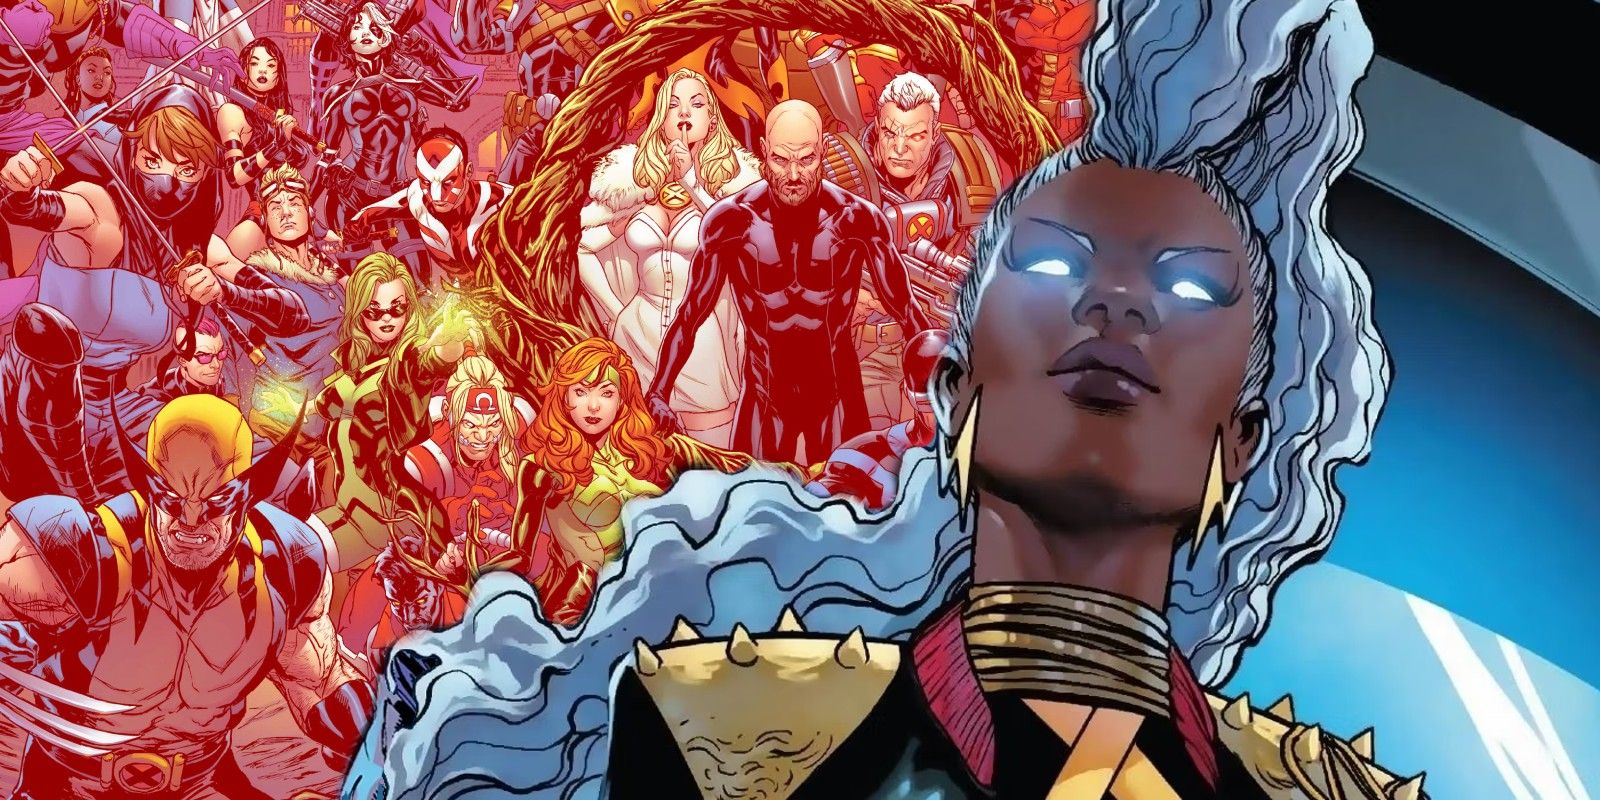 After the Fall of X, What is Subsequent for Mutantkind? (Main Theories Defined)